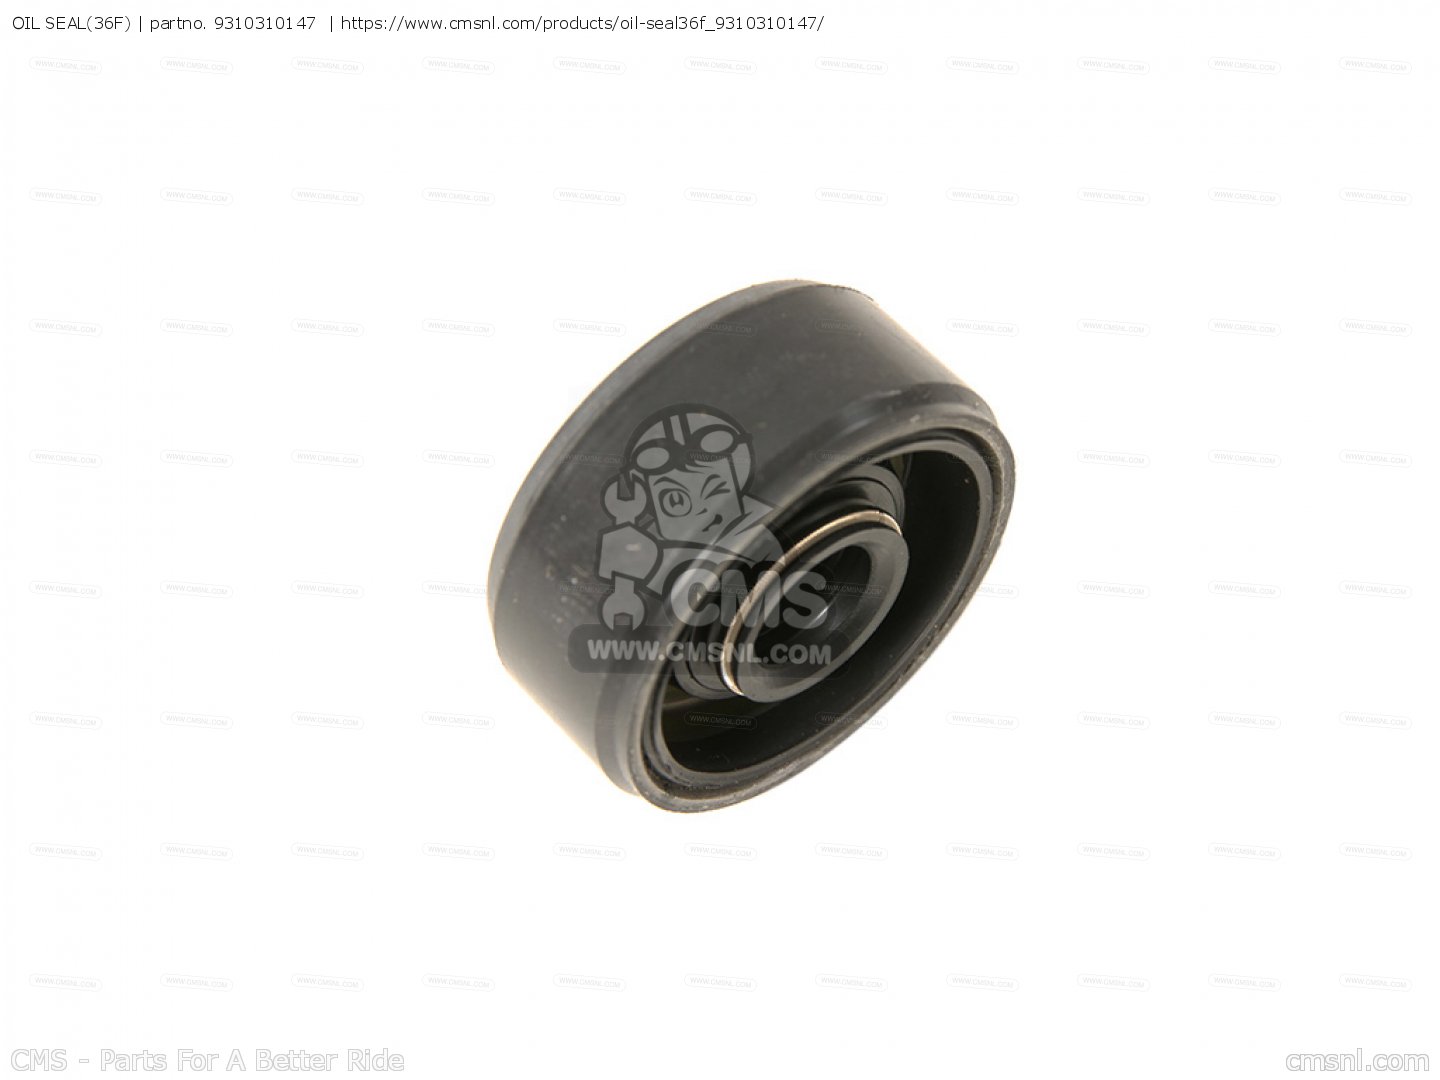 OIL SEAL (36F) for YZ125 2002 (2) USA - order at CMSNL